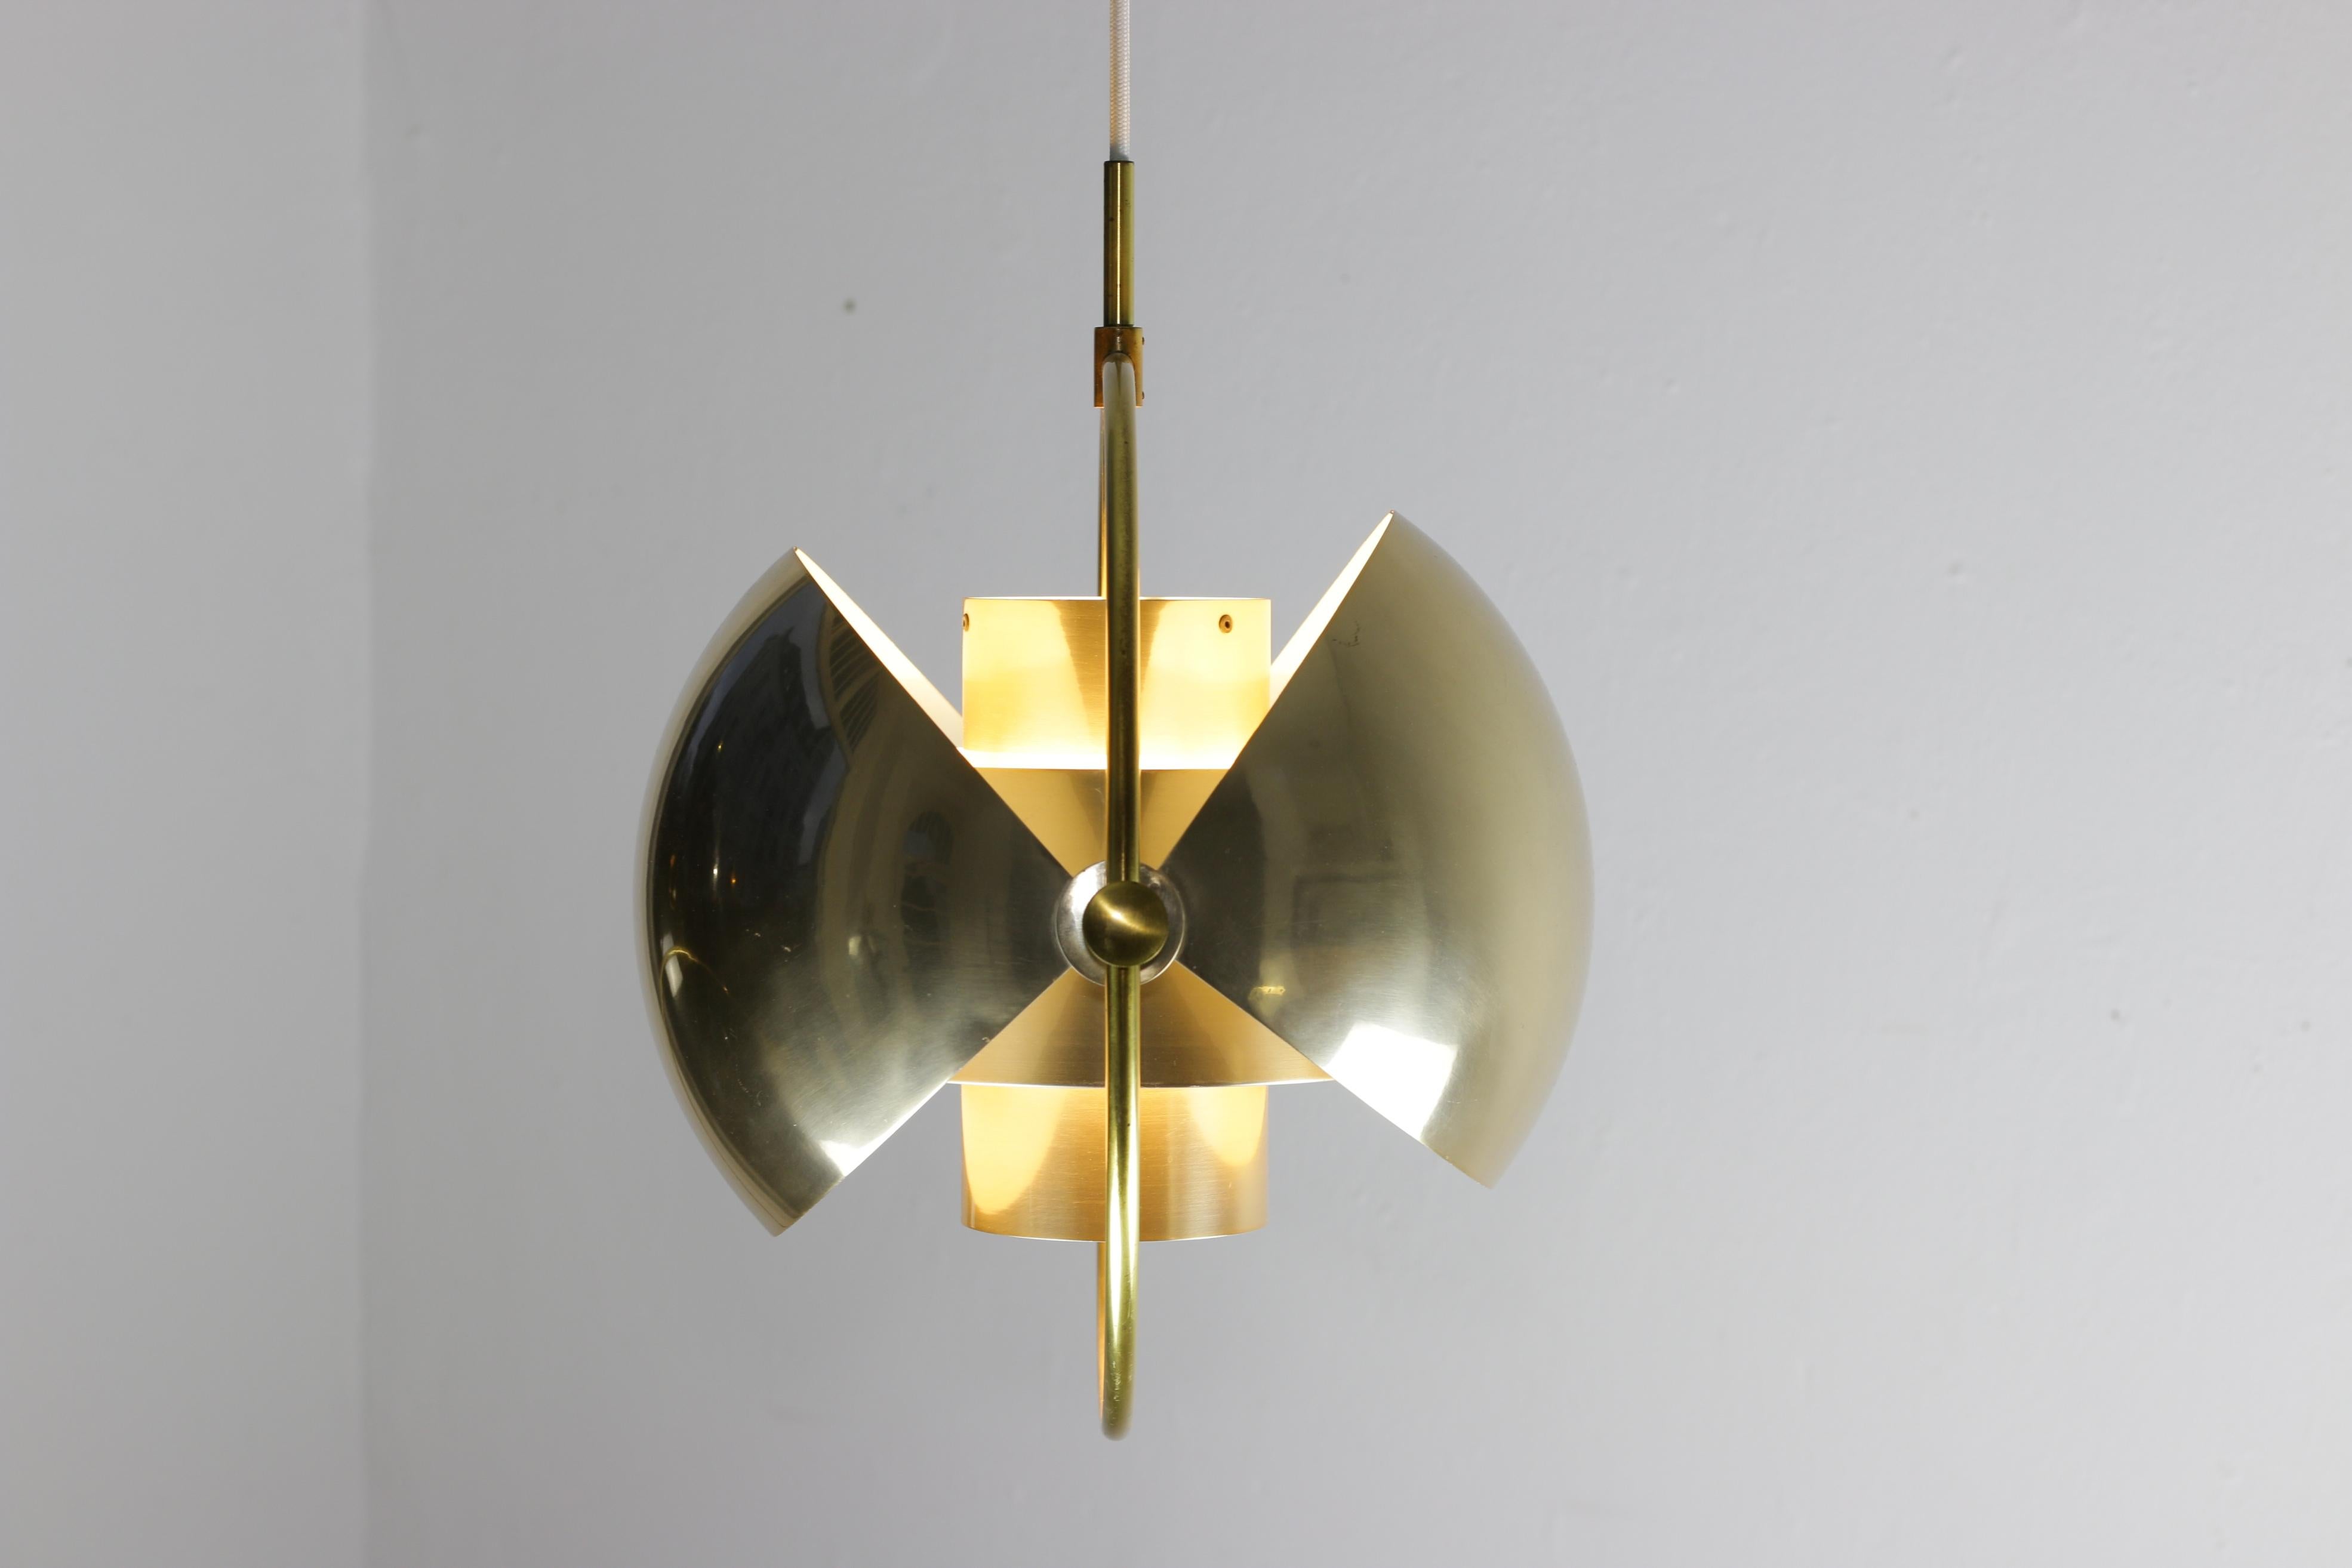 Original vintage Multi- Lite was designed by Louis Weisdorf for the Danish lamp manufacturer Lyfa in 1972.

This lamp has two quarter sphere shaped shades which are moveable in each potential position.
The multi-adjustable halves of the shade